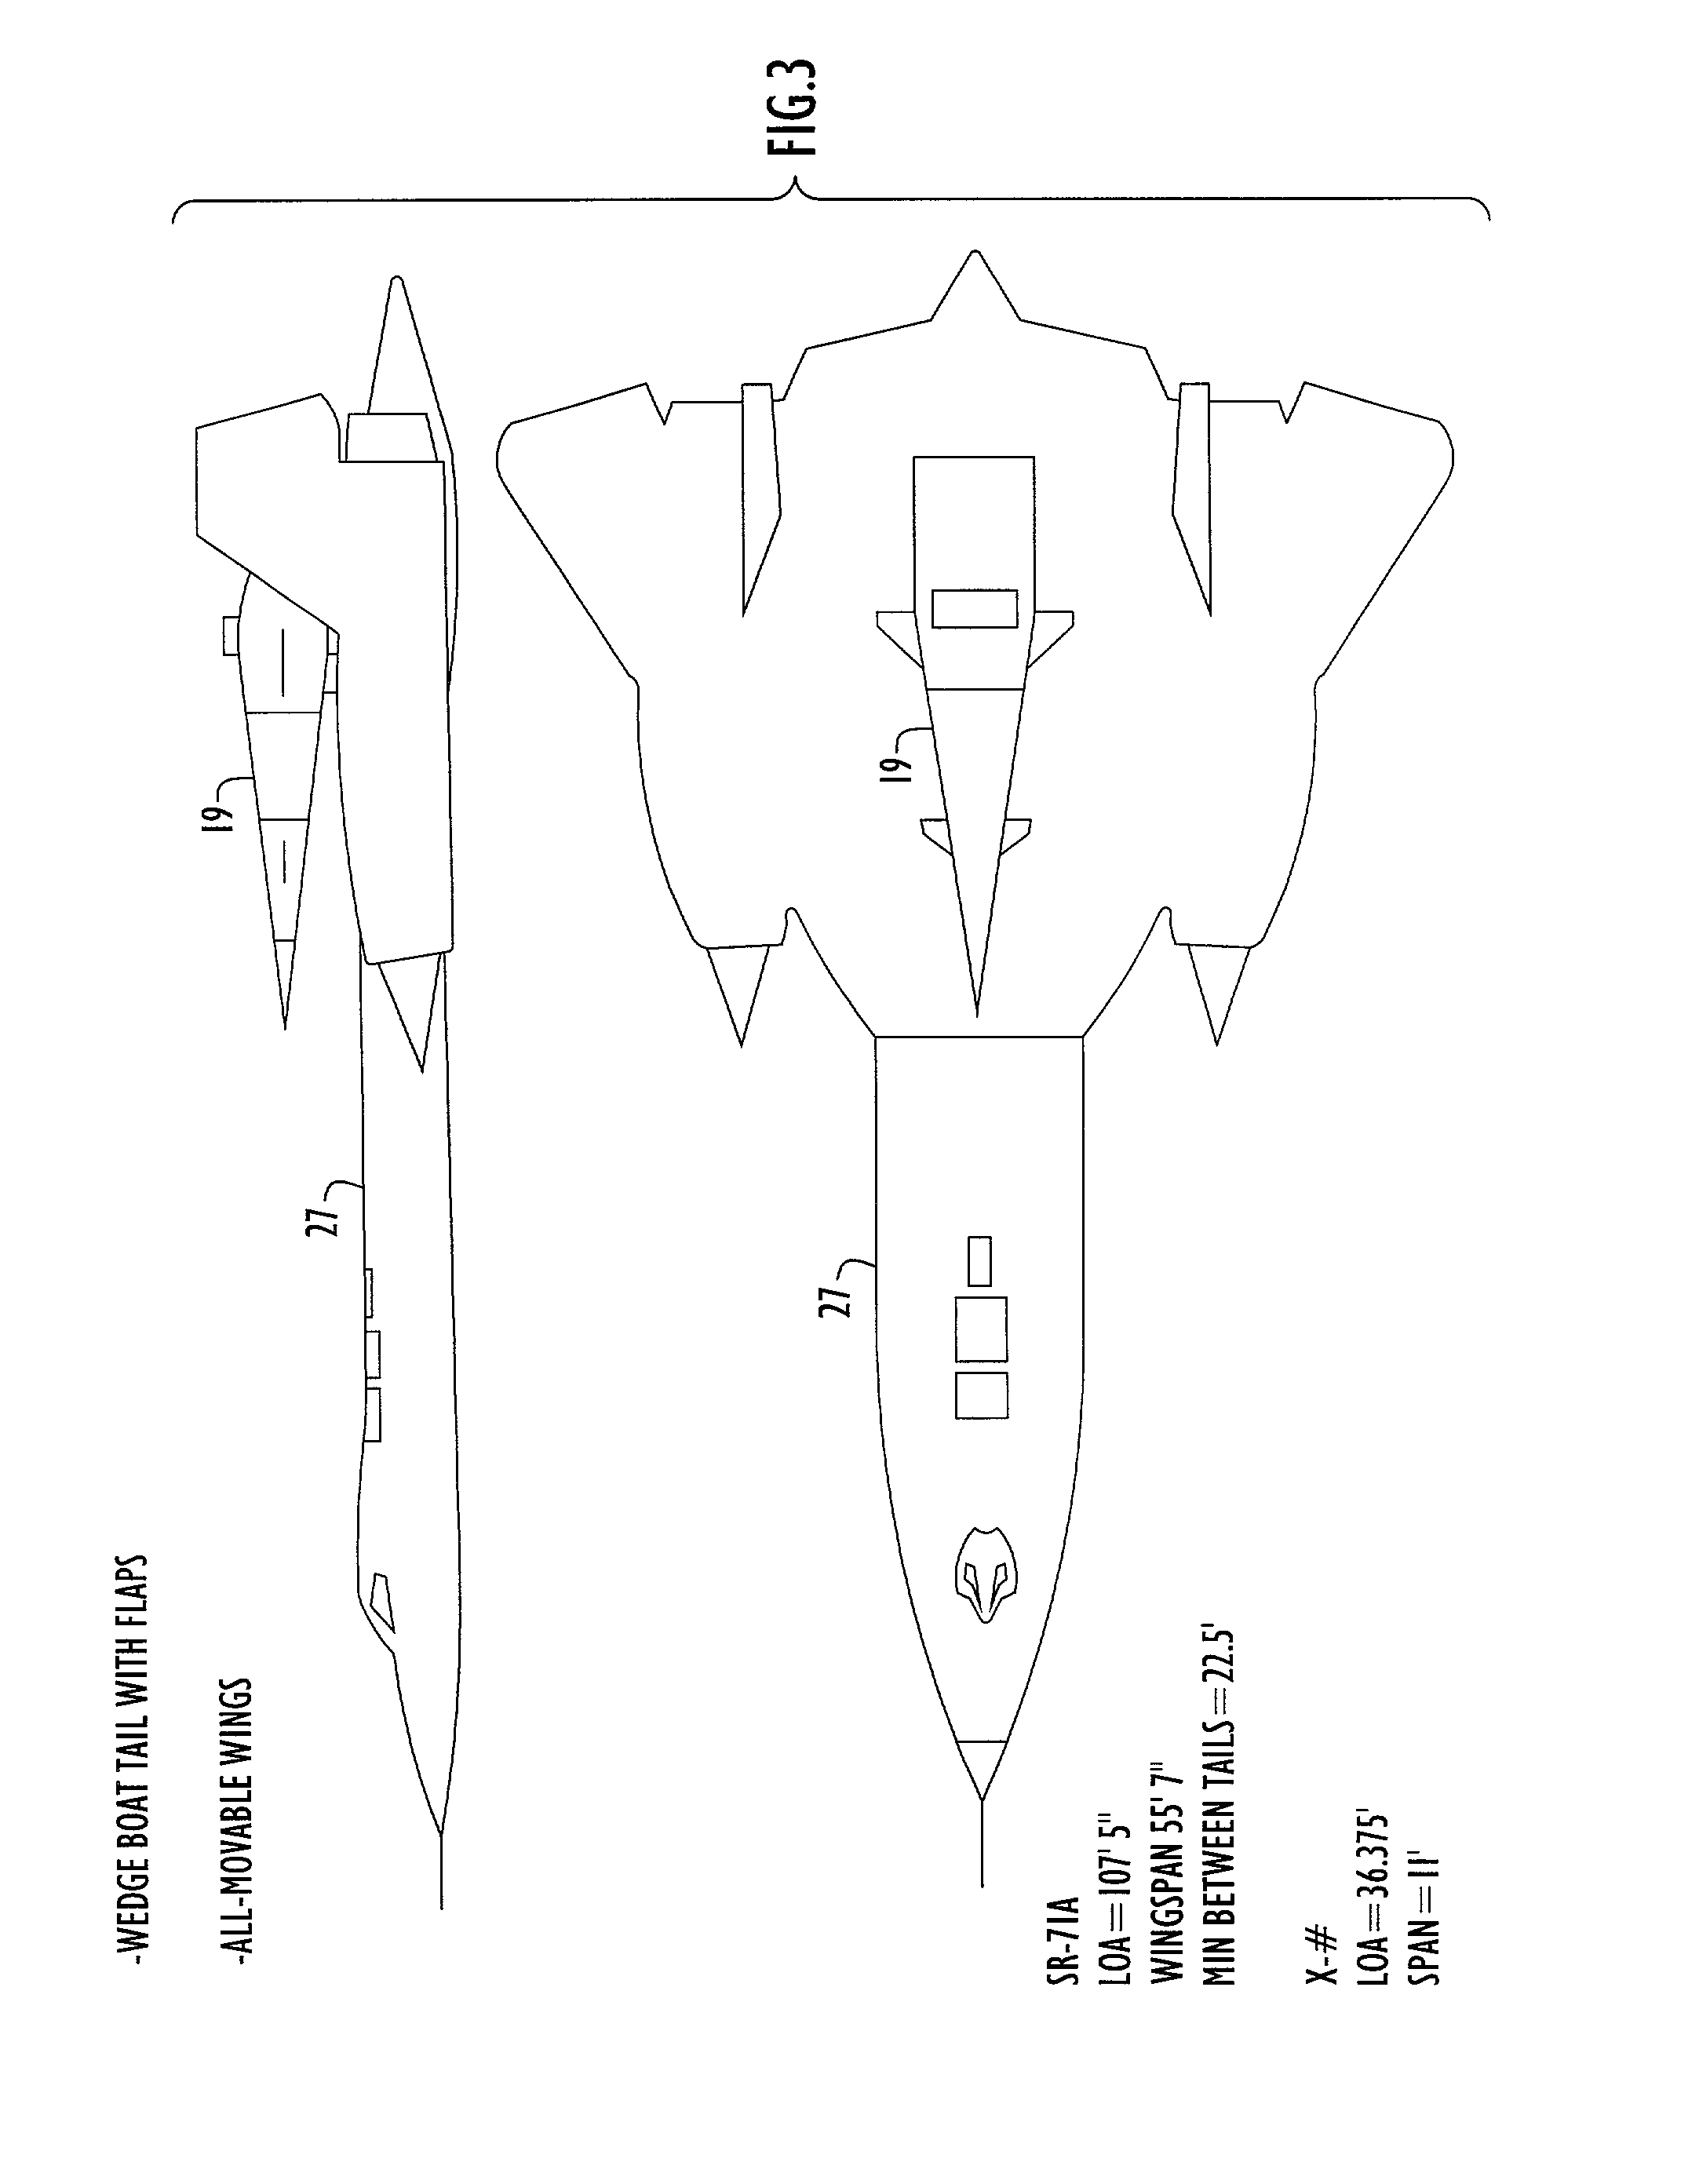 Hypersonic and orbital vehicles system